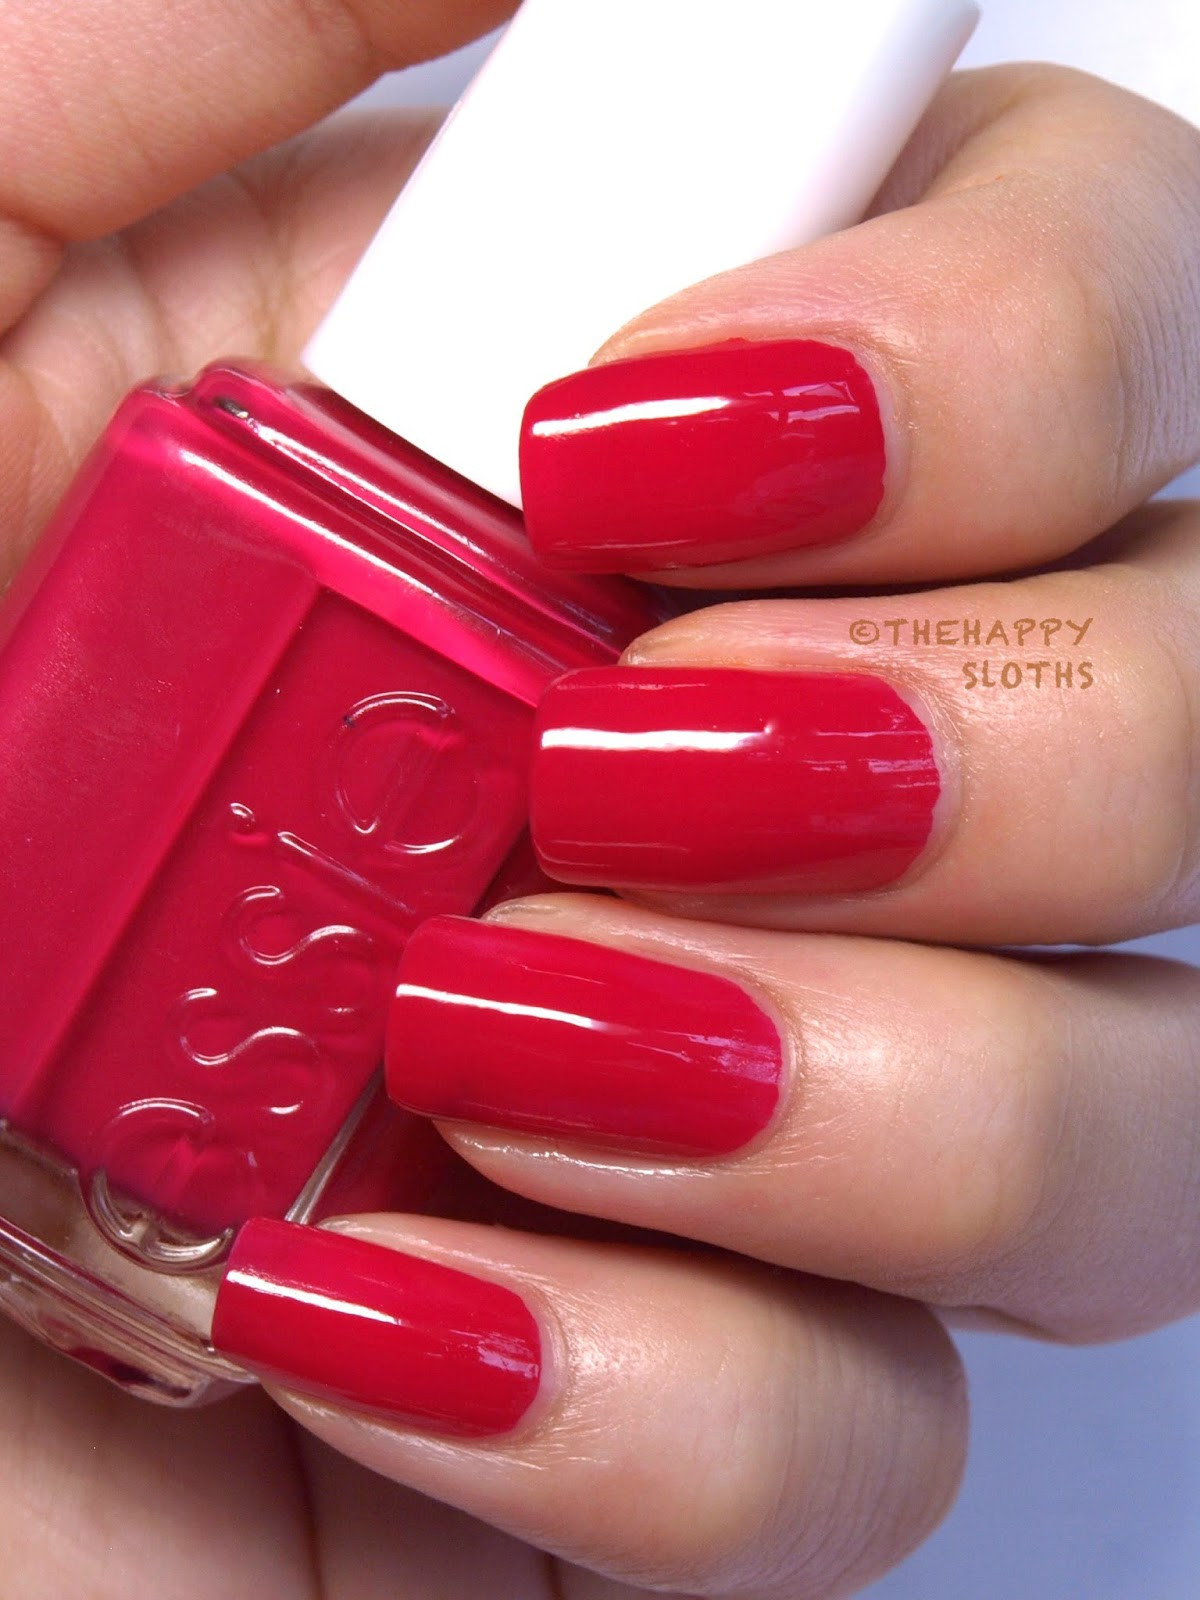 In Nail Colors
 Essie Summer 2014 Nail Polish Collection Review and